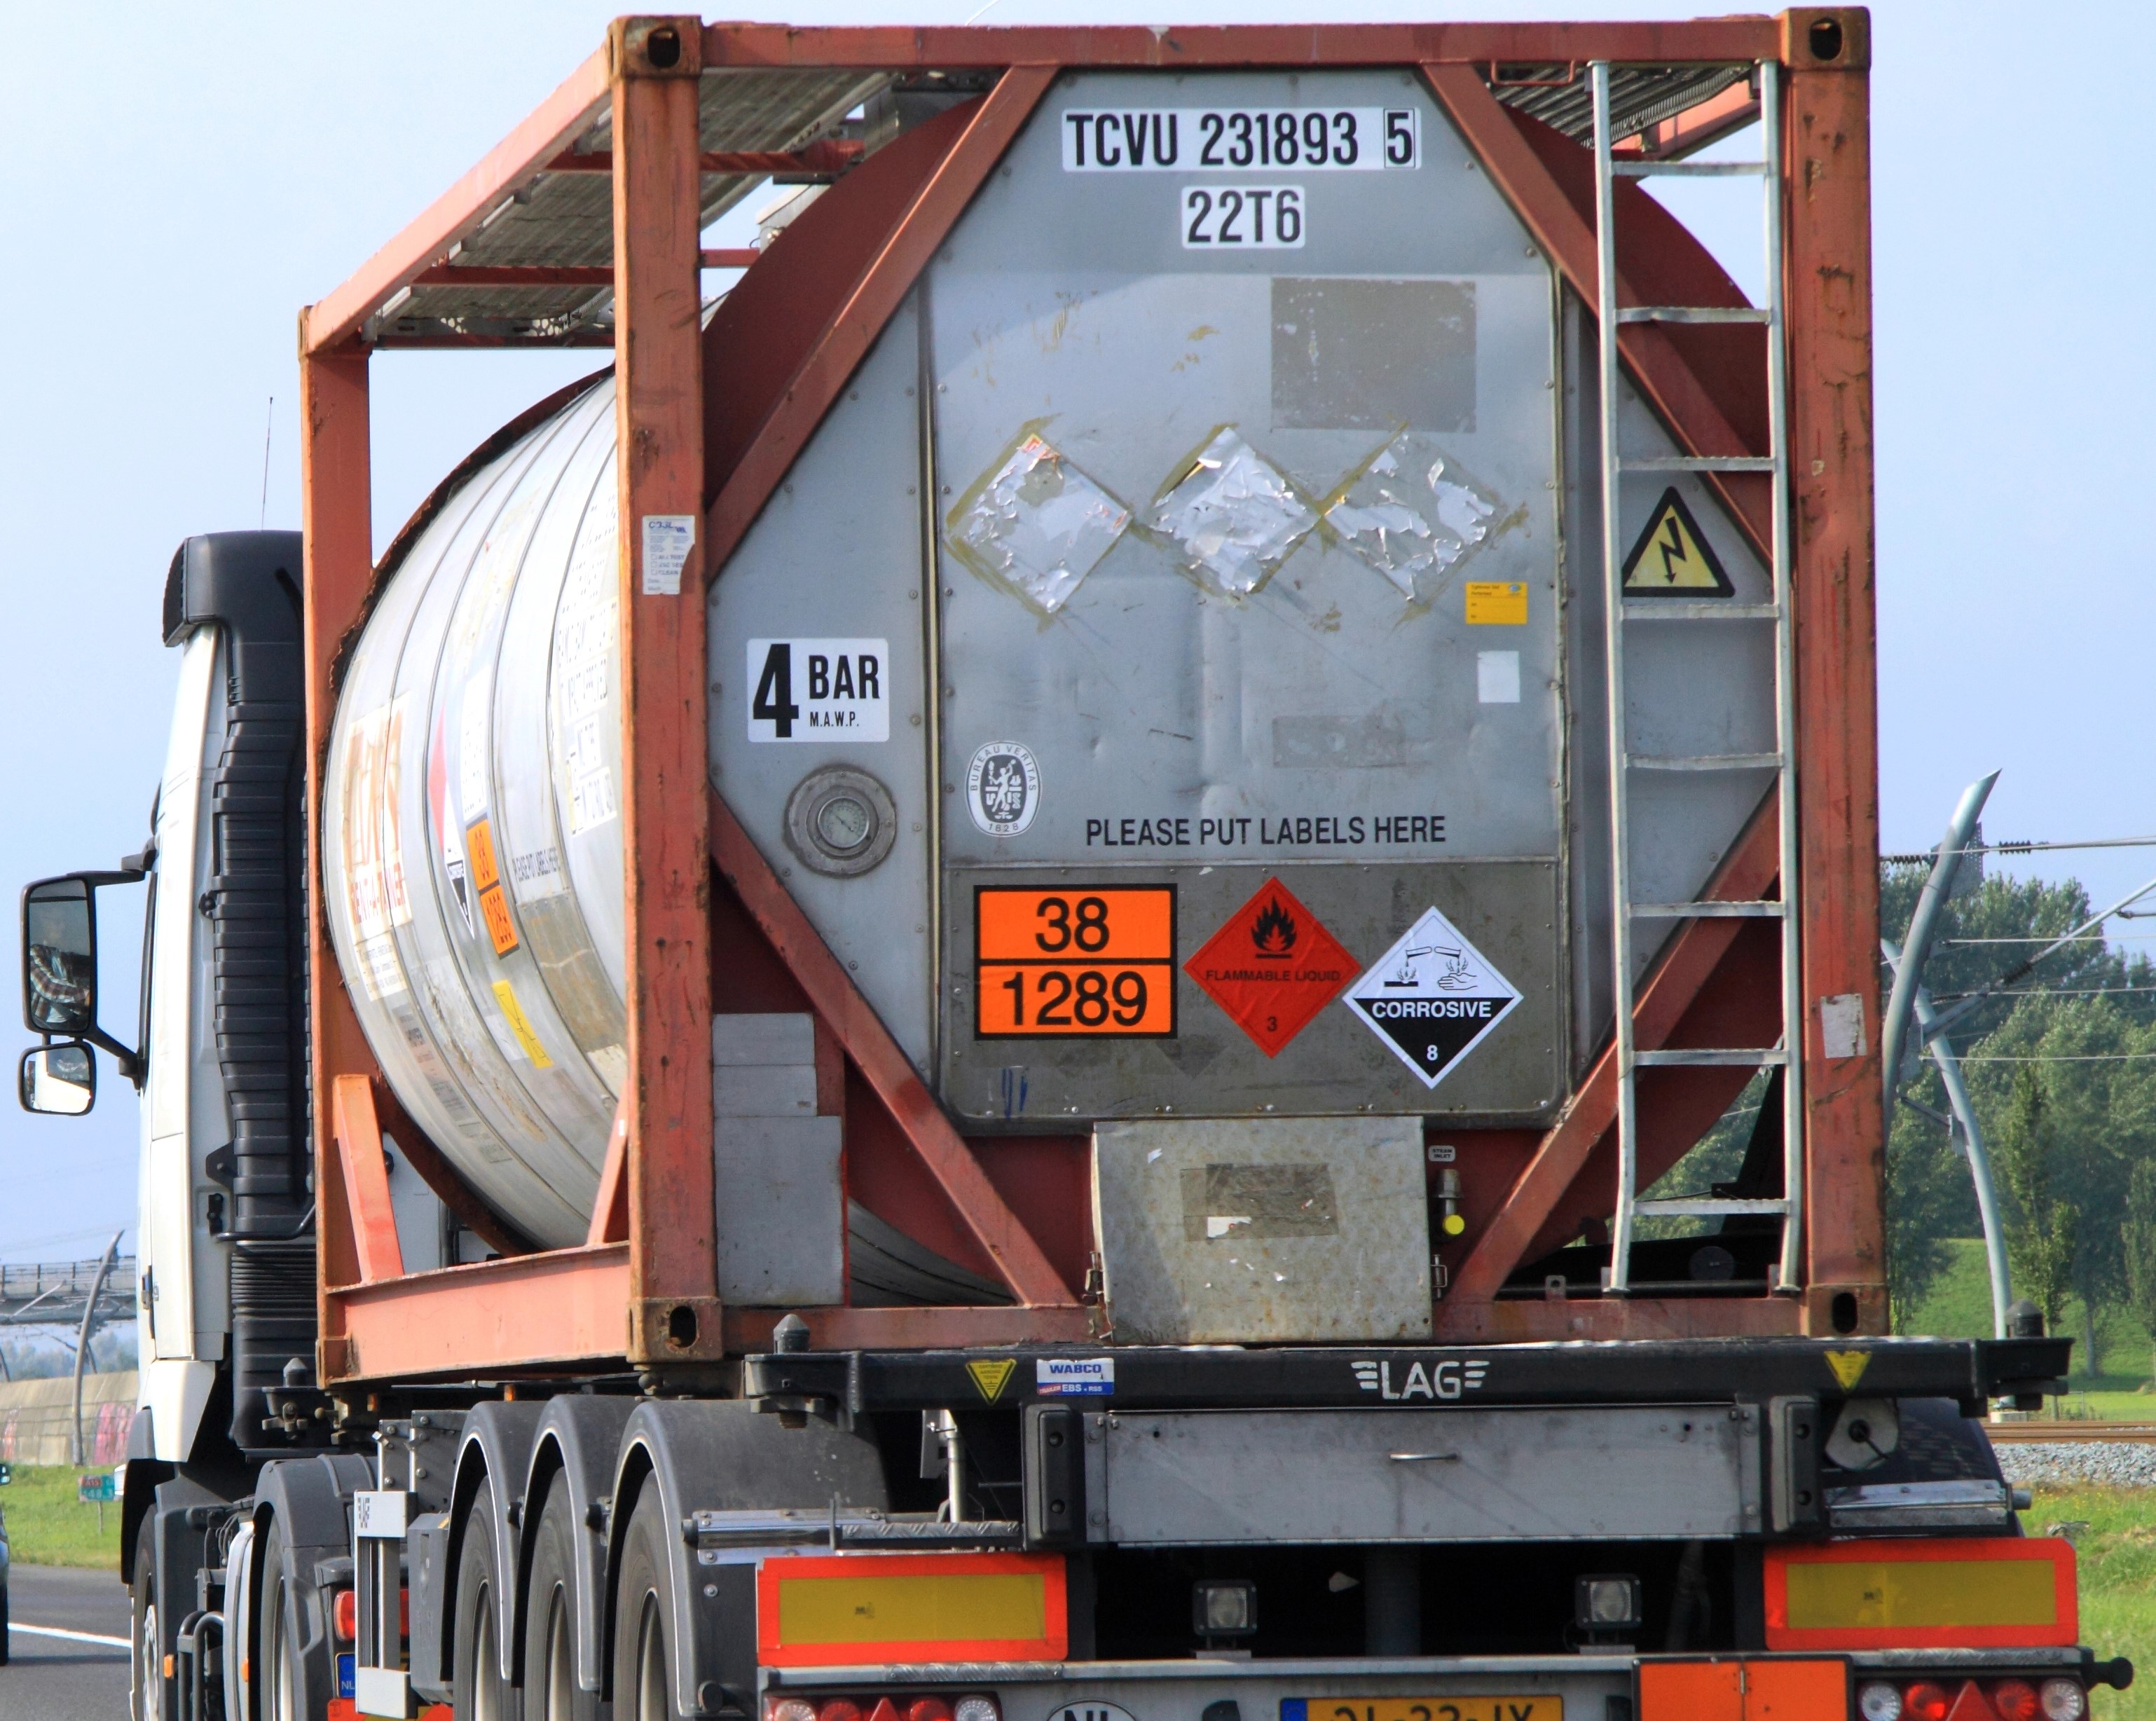 Safety in Transporting Hazardous Materials